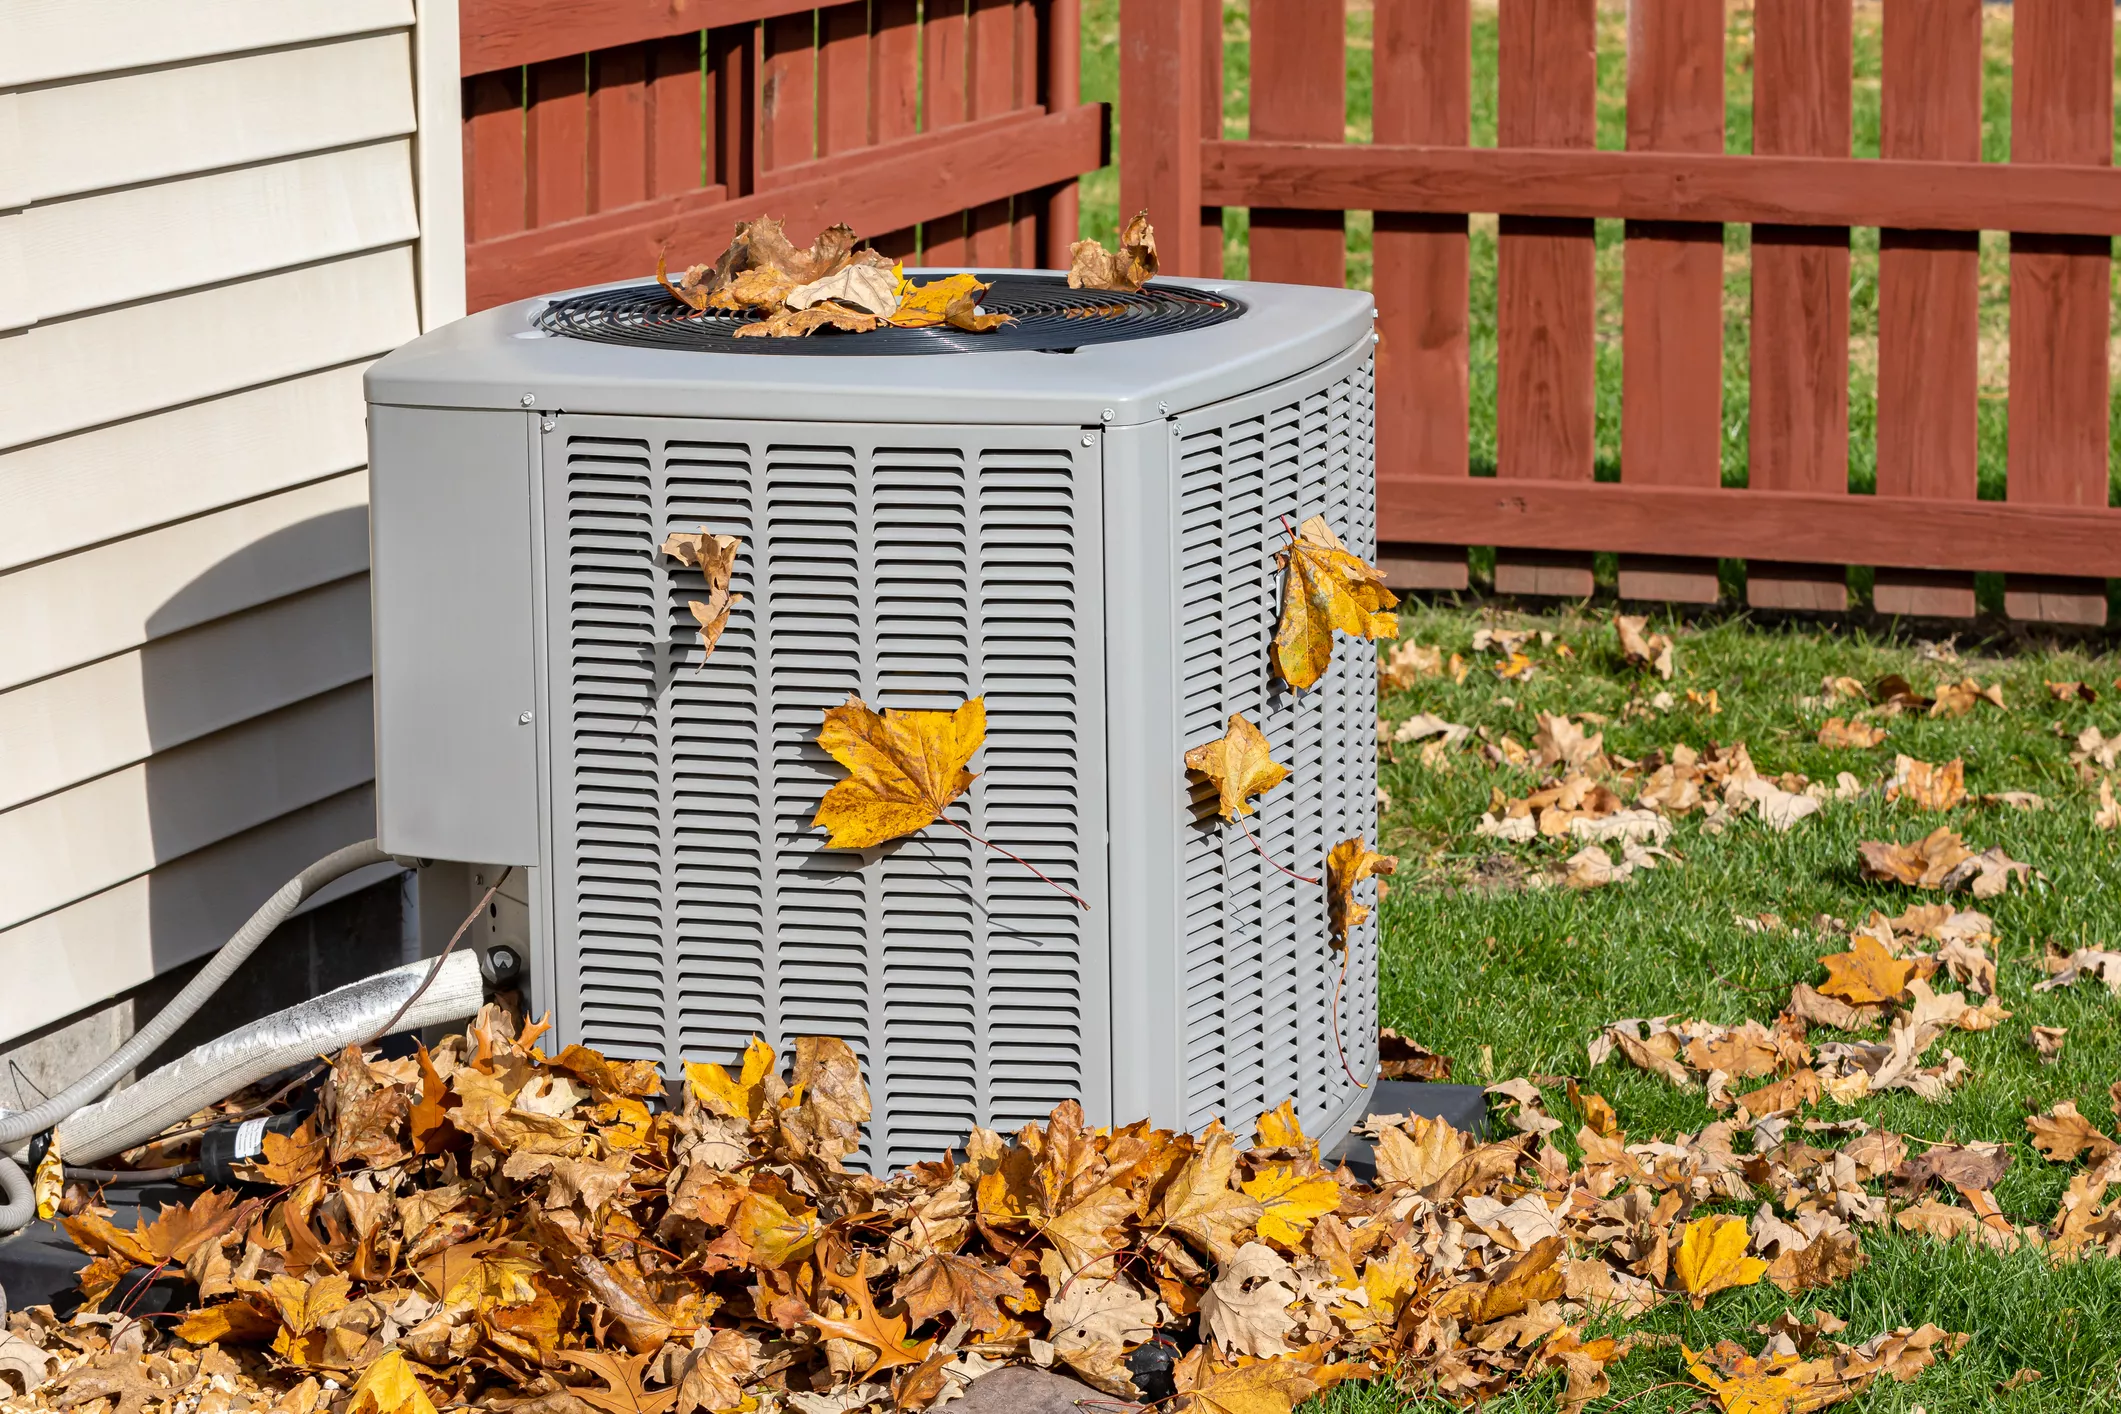 Autumn leaves on an air conditioner. Depicting impact of leaves on HVAC